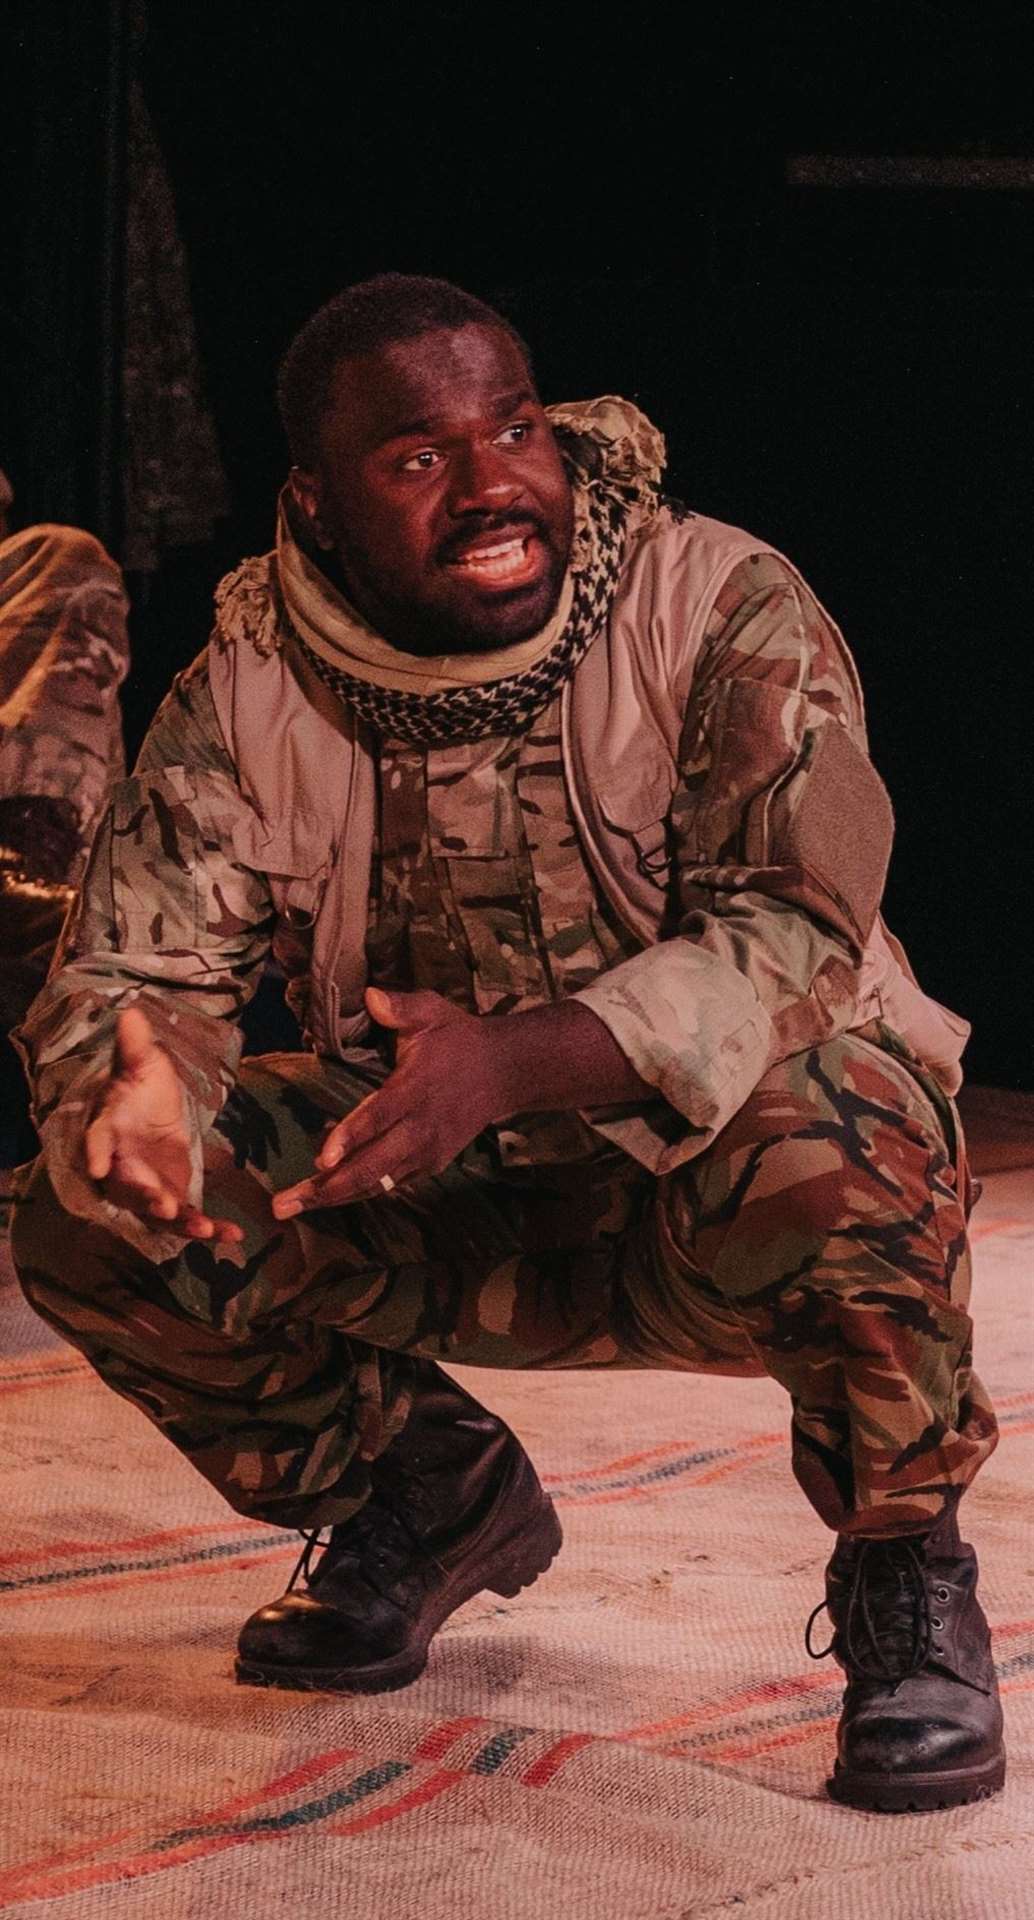 Thierry Mabonga as Ibrihim in Everything Under The Sun.